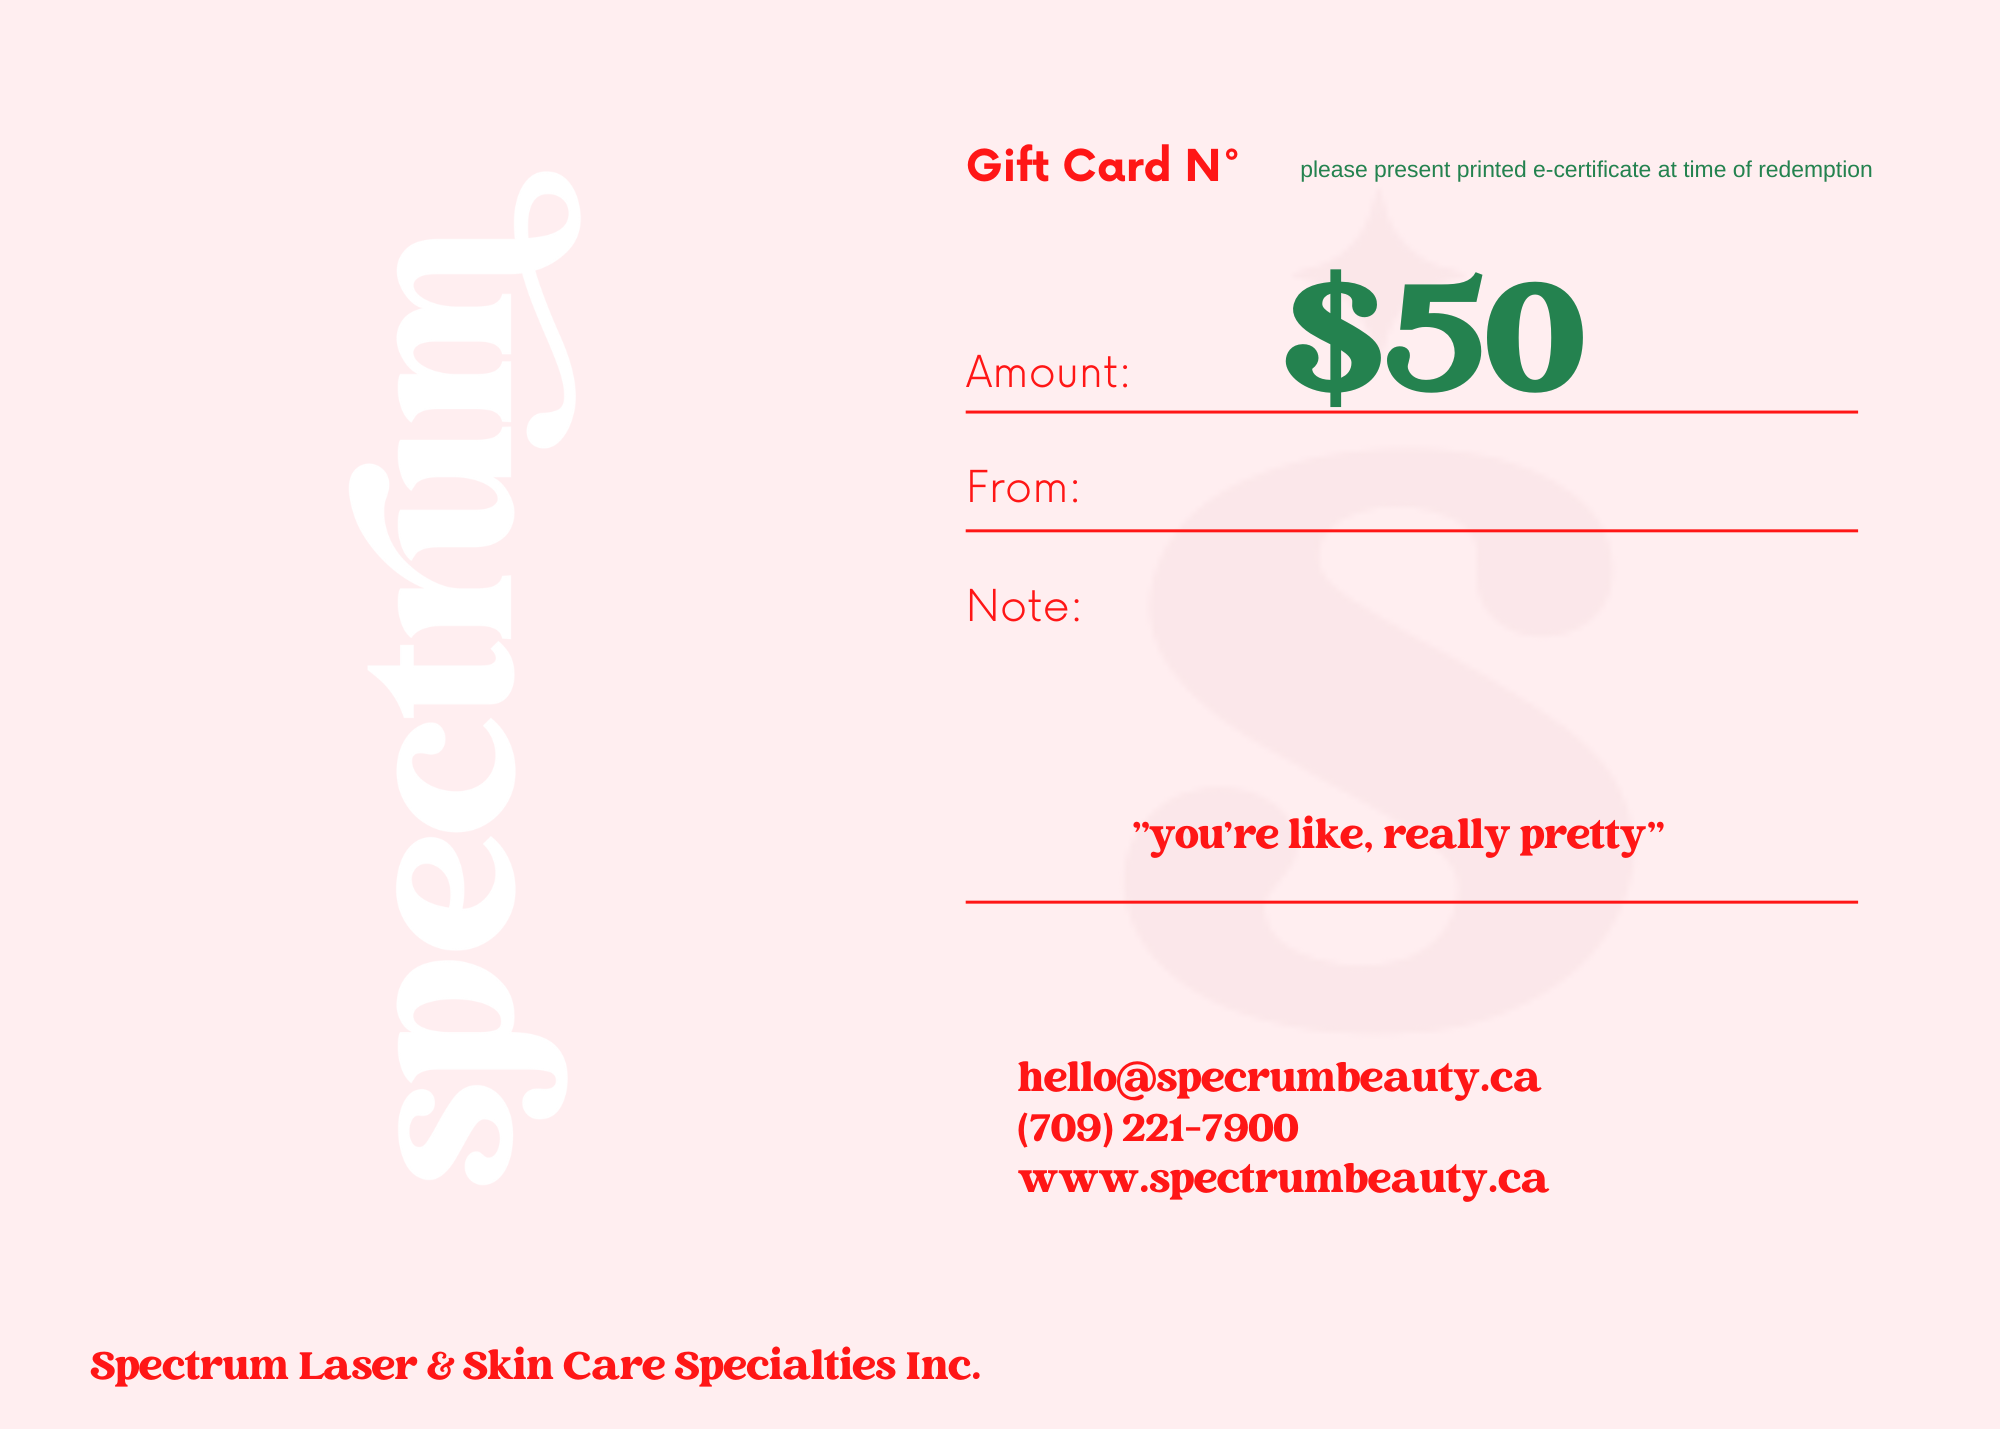 Gift Card or Certificate